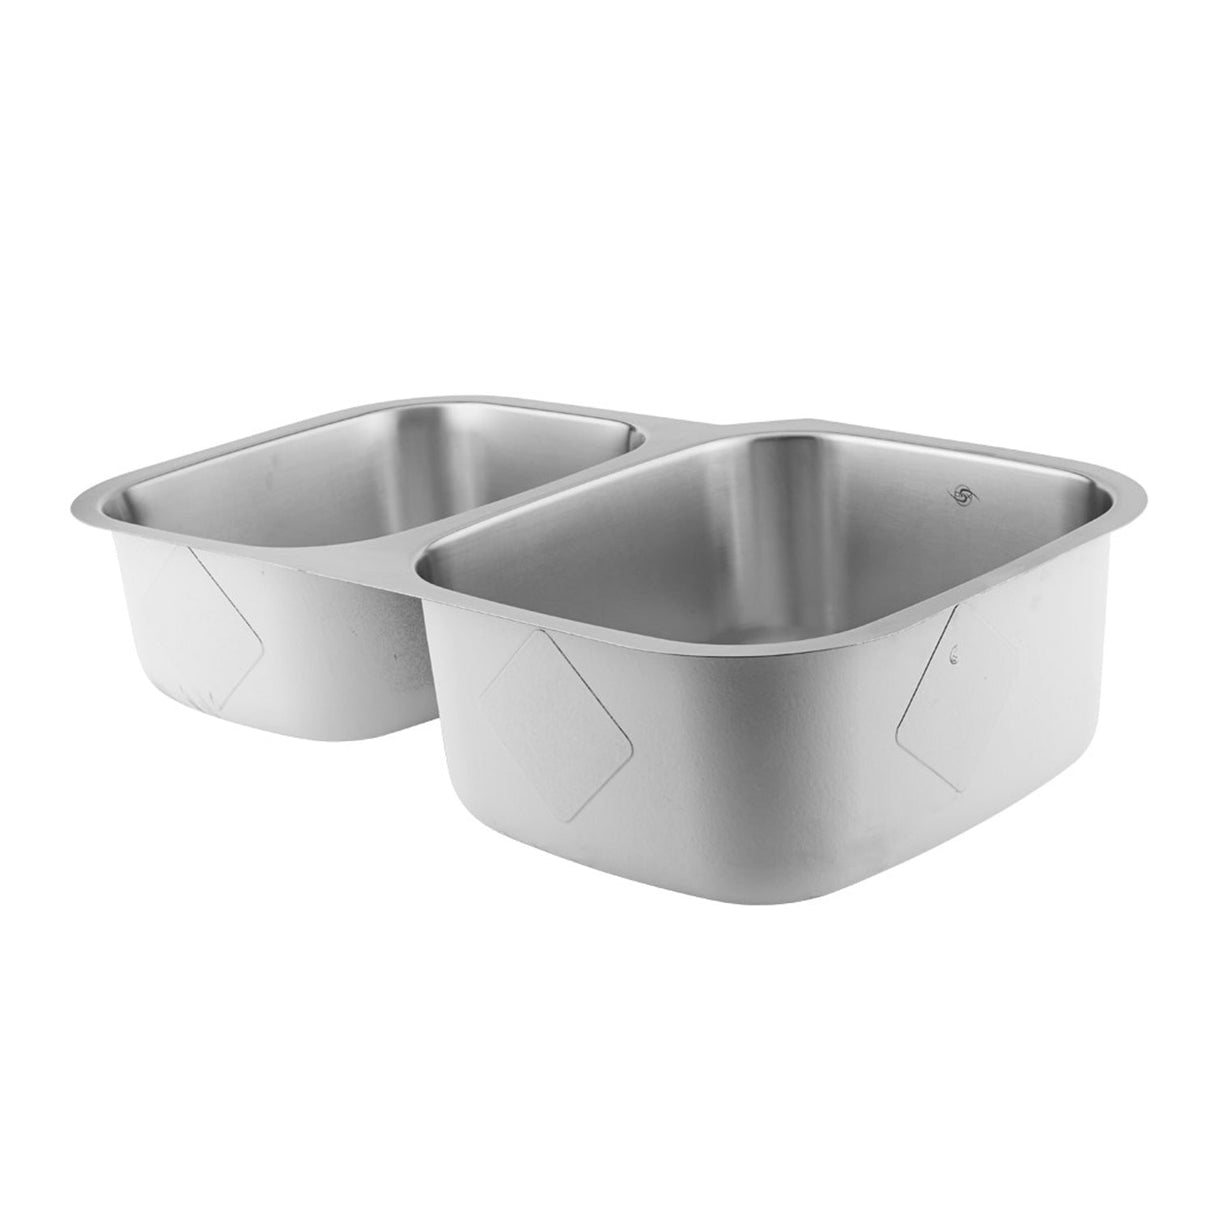 DAX Stainless Steel 40/60 Double Bowl Undermount Kitchen Sink, Brushed Stainless Steel DAX-3120R